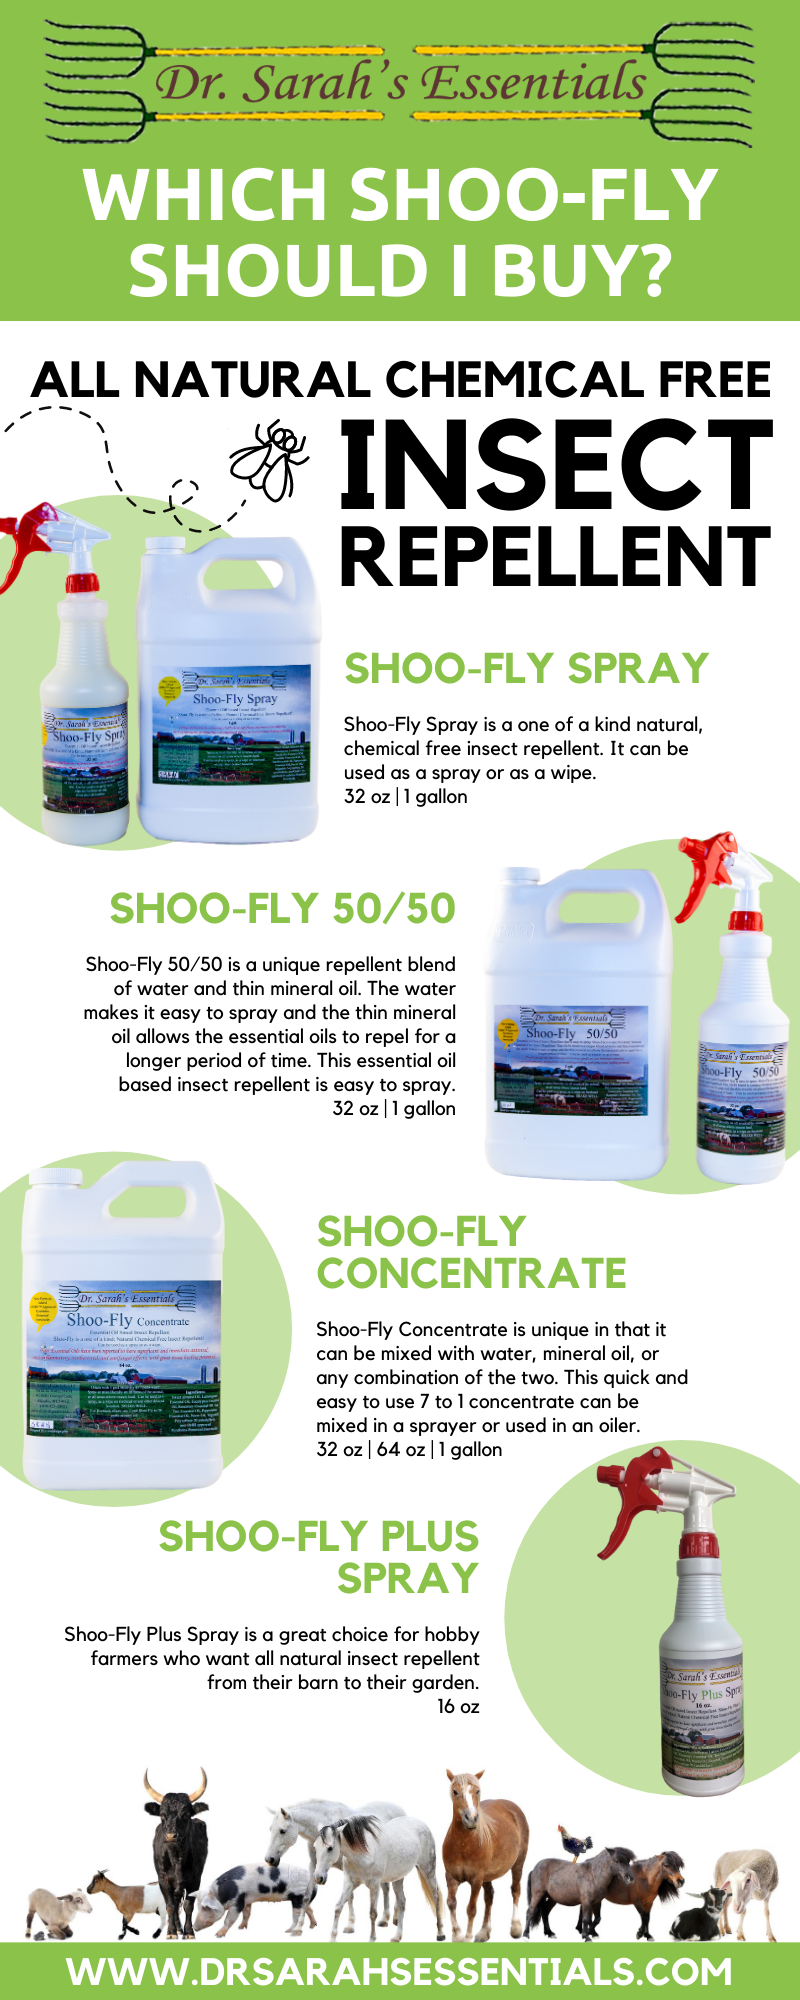 Shoo-Fly 50/50 Insect Repellent